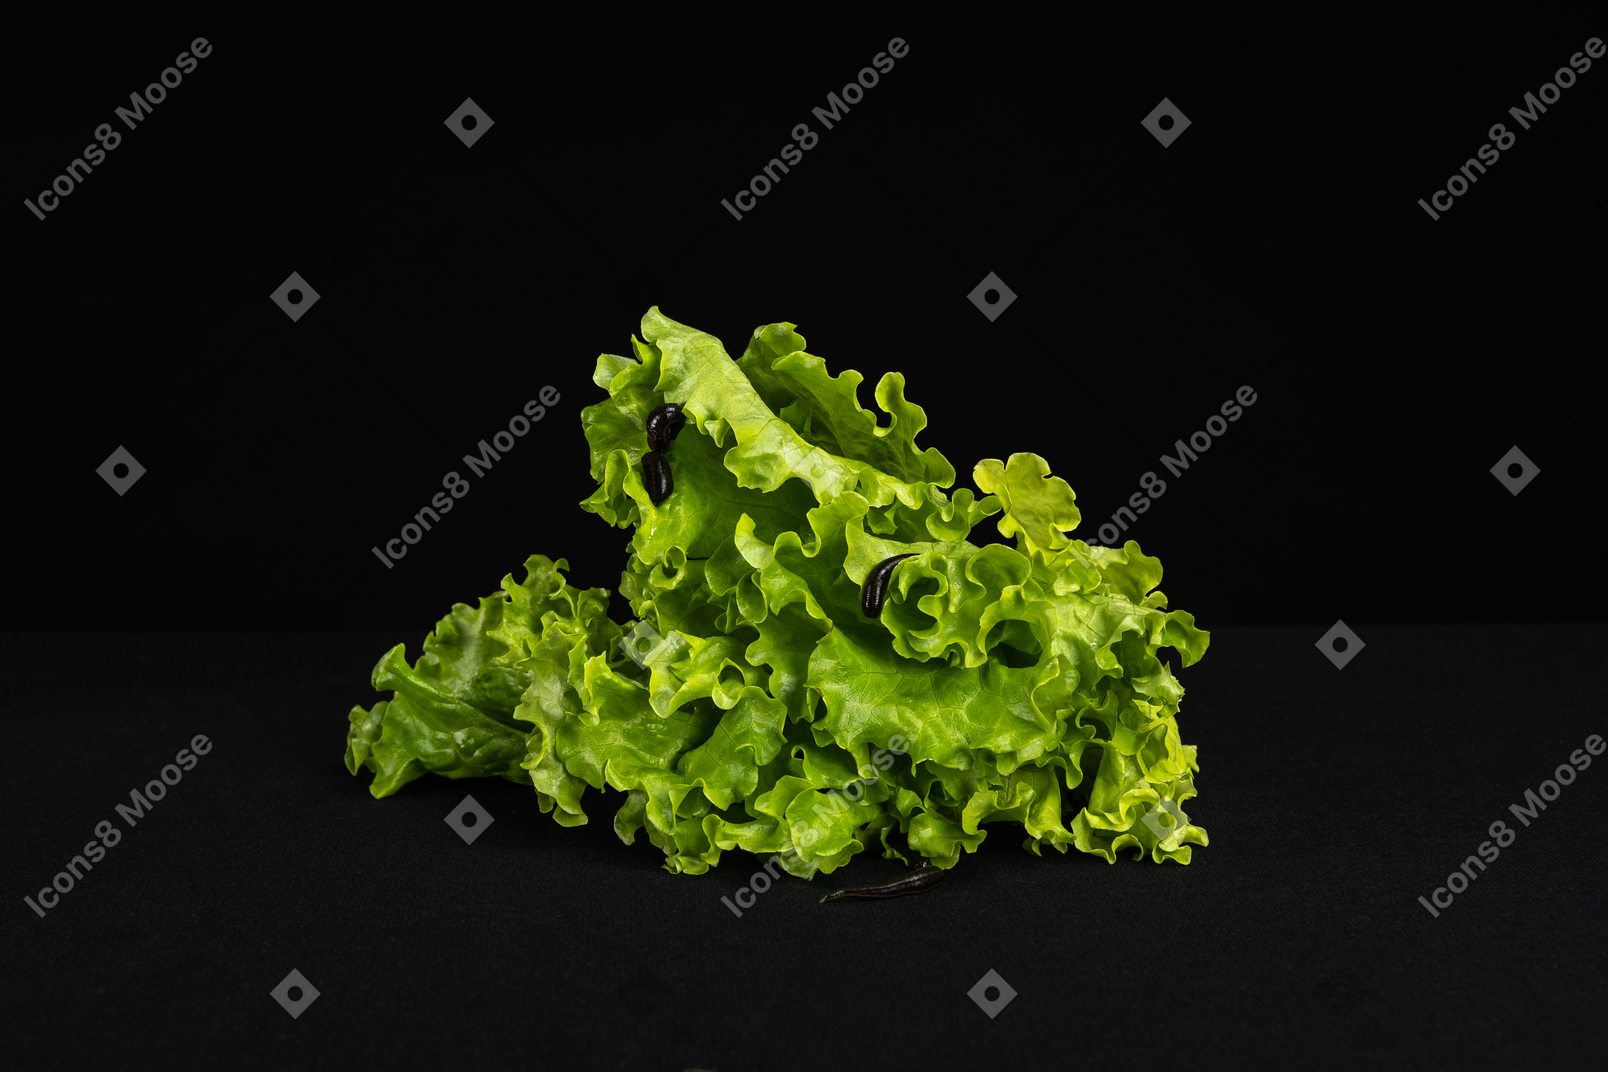 Pile of green lettuce with worms on it